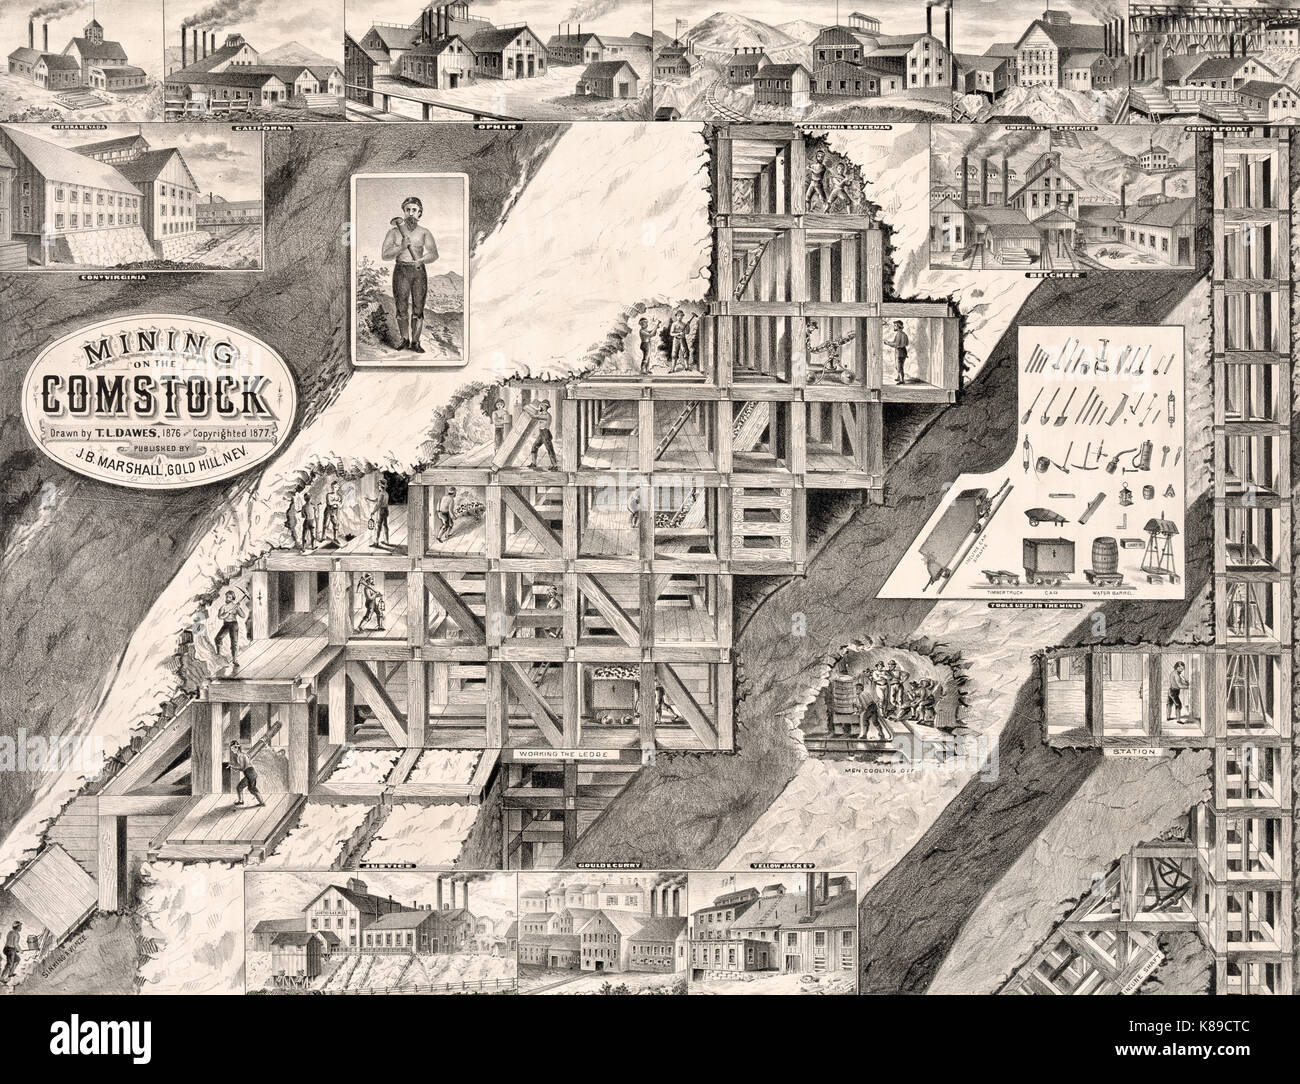 Lithograph showing various scenes from the Comstock Lode, a large silver and gold deposit worked by numerous mines in Virginia City and Gold Hill, Nevada, and the first silver strike in the United States. Depicted are the square-set timbering method first developed at the Comstock Lode, the various headframes and mills of mines, mining tools, cooling rooms, and shafts. 1877 Stock Photo